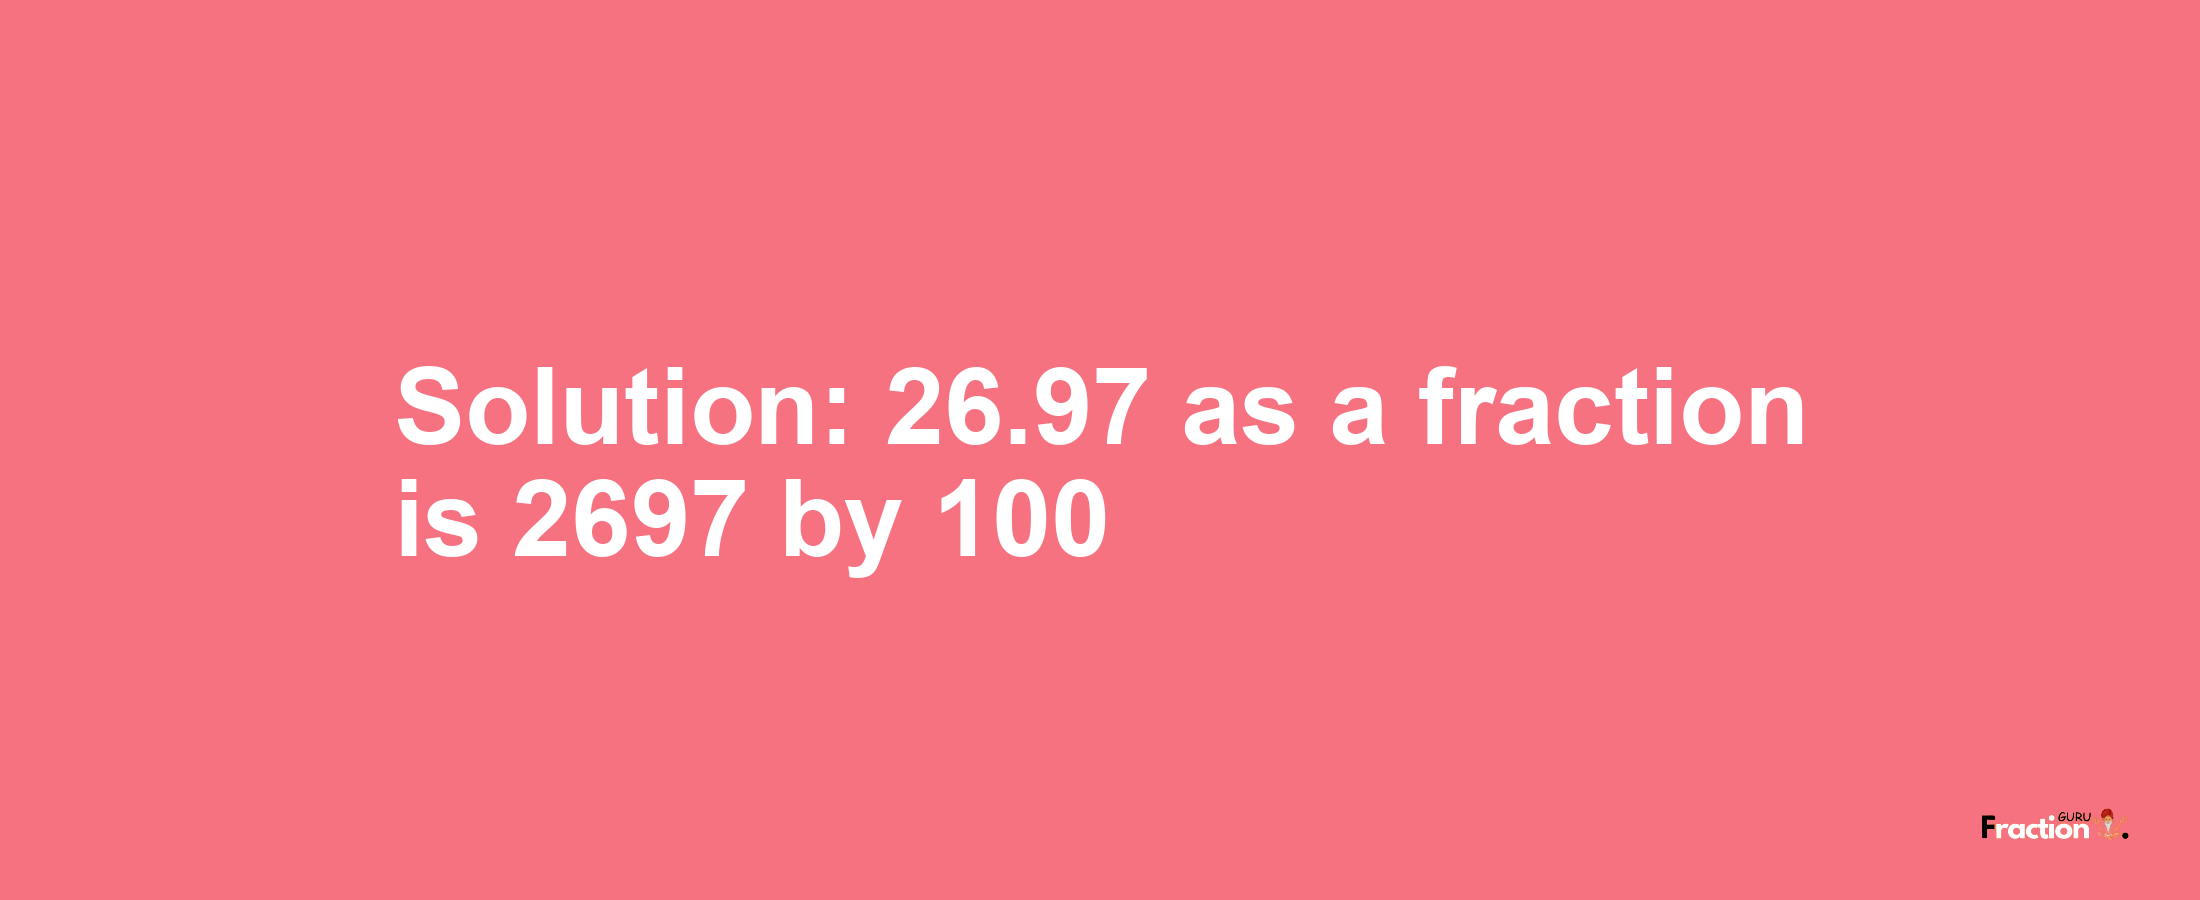 Solution:26.97 as a fraction is 2697/100